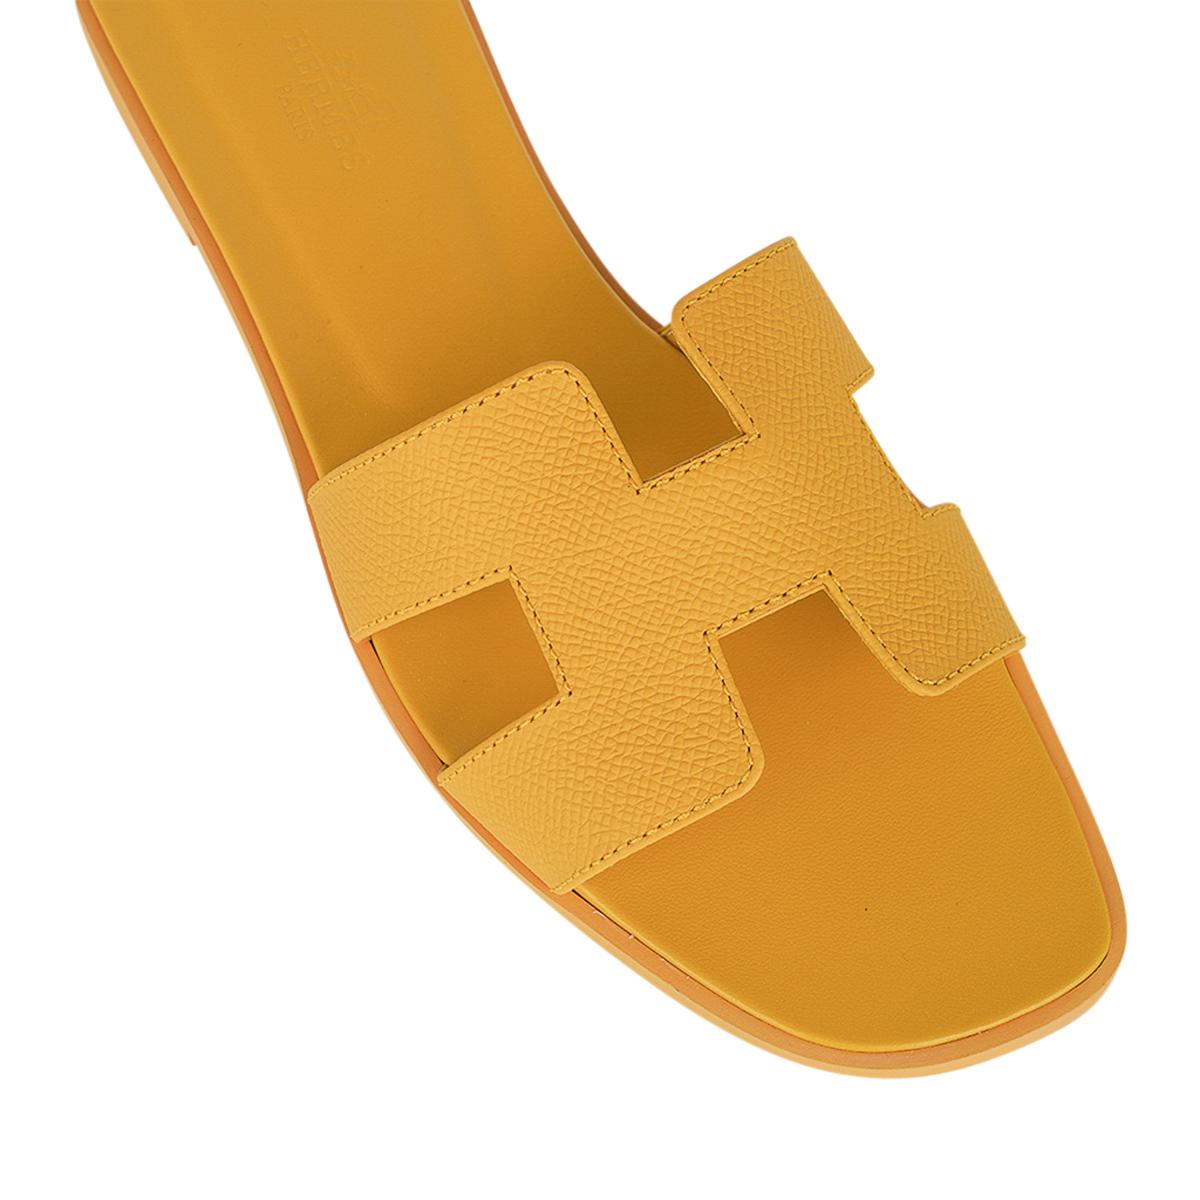 Mightychic offers Hermes Oran sandal featured in Jaune Sable.
This warm soft yellow Hermes Oran flat slide sandal is featured in Epsom leather.
The iconic H cutout over the top of the foot.
Matching embossed calfskin insole.
Wood heel with leather